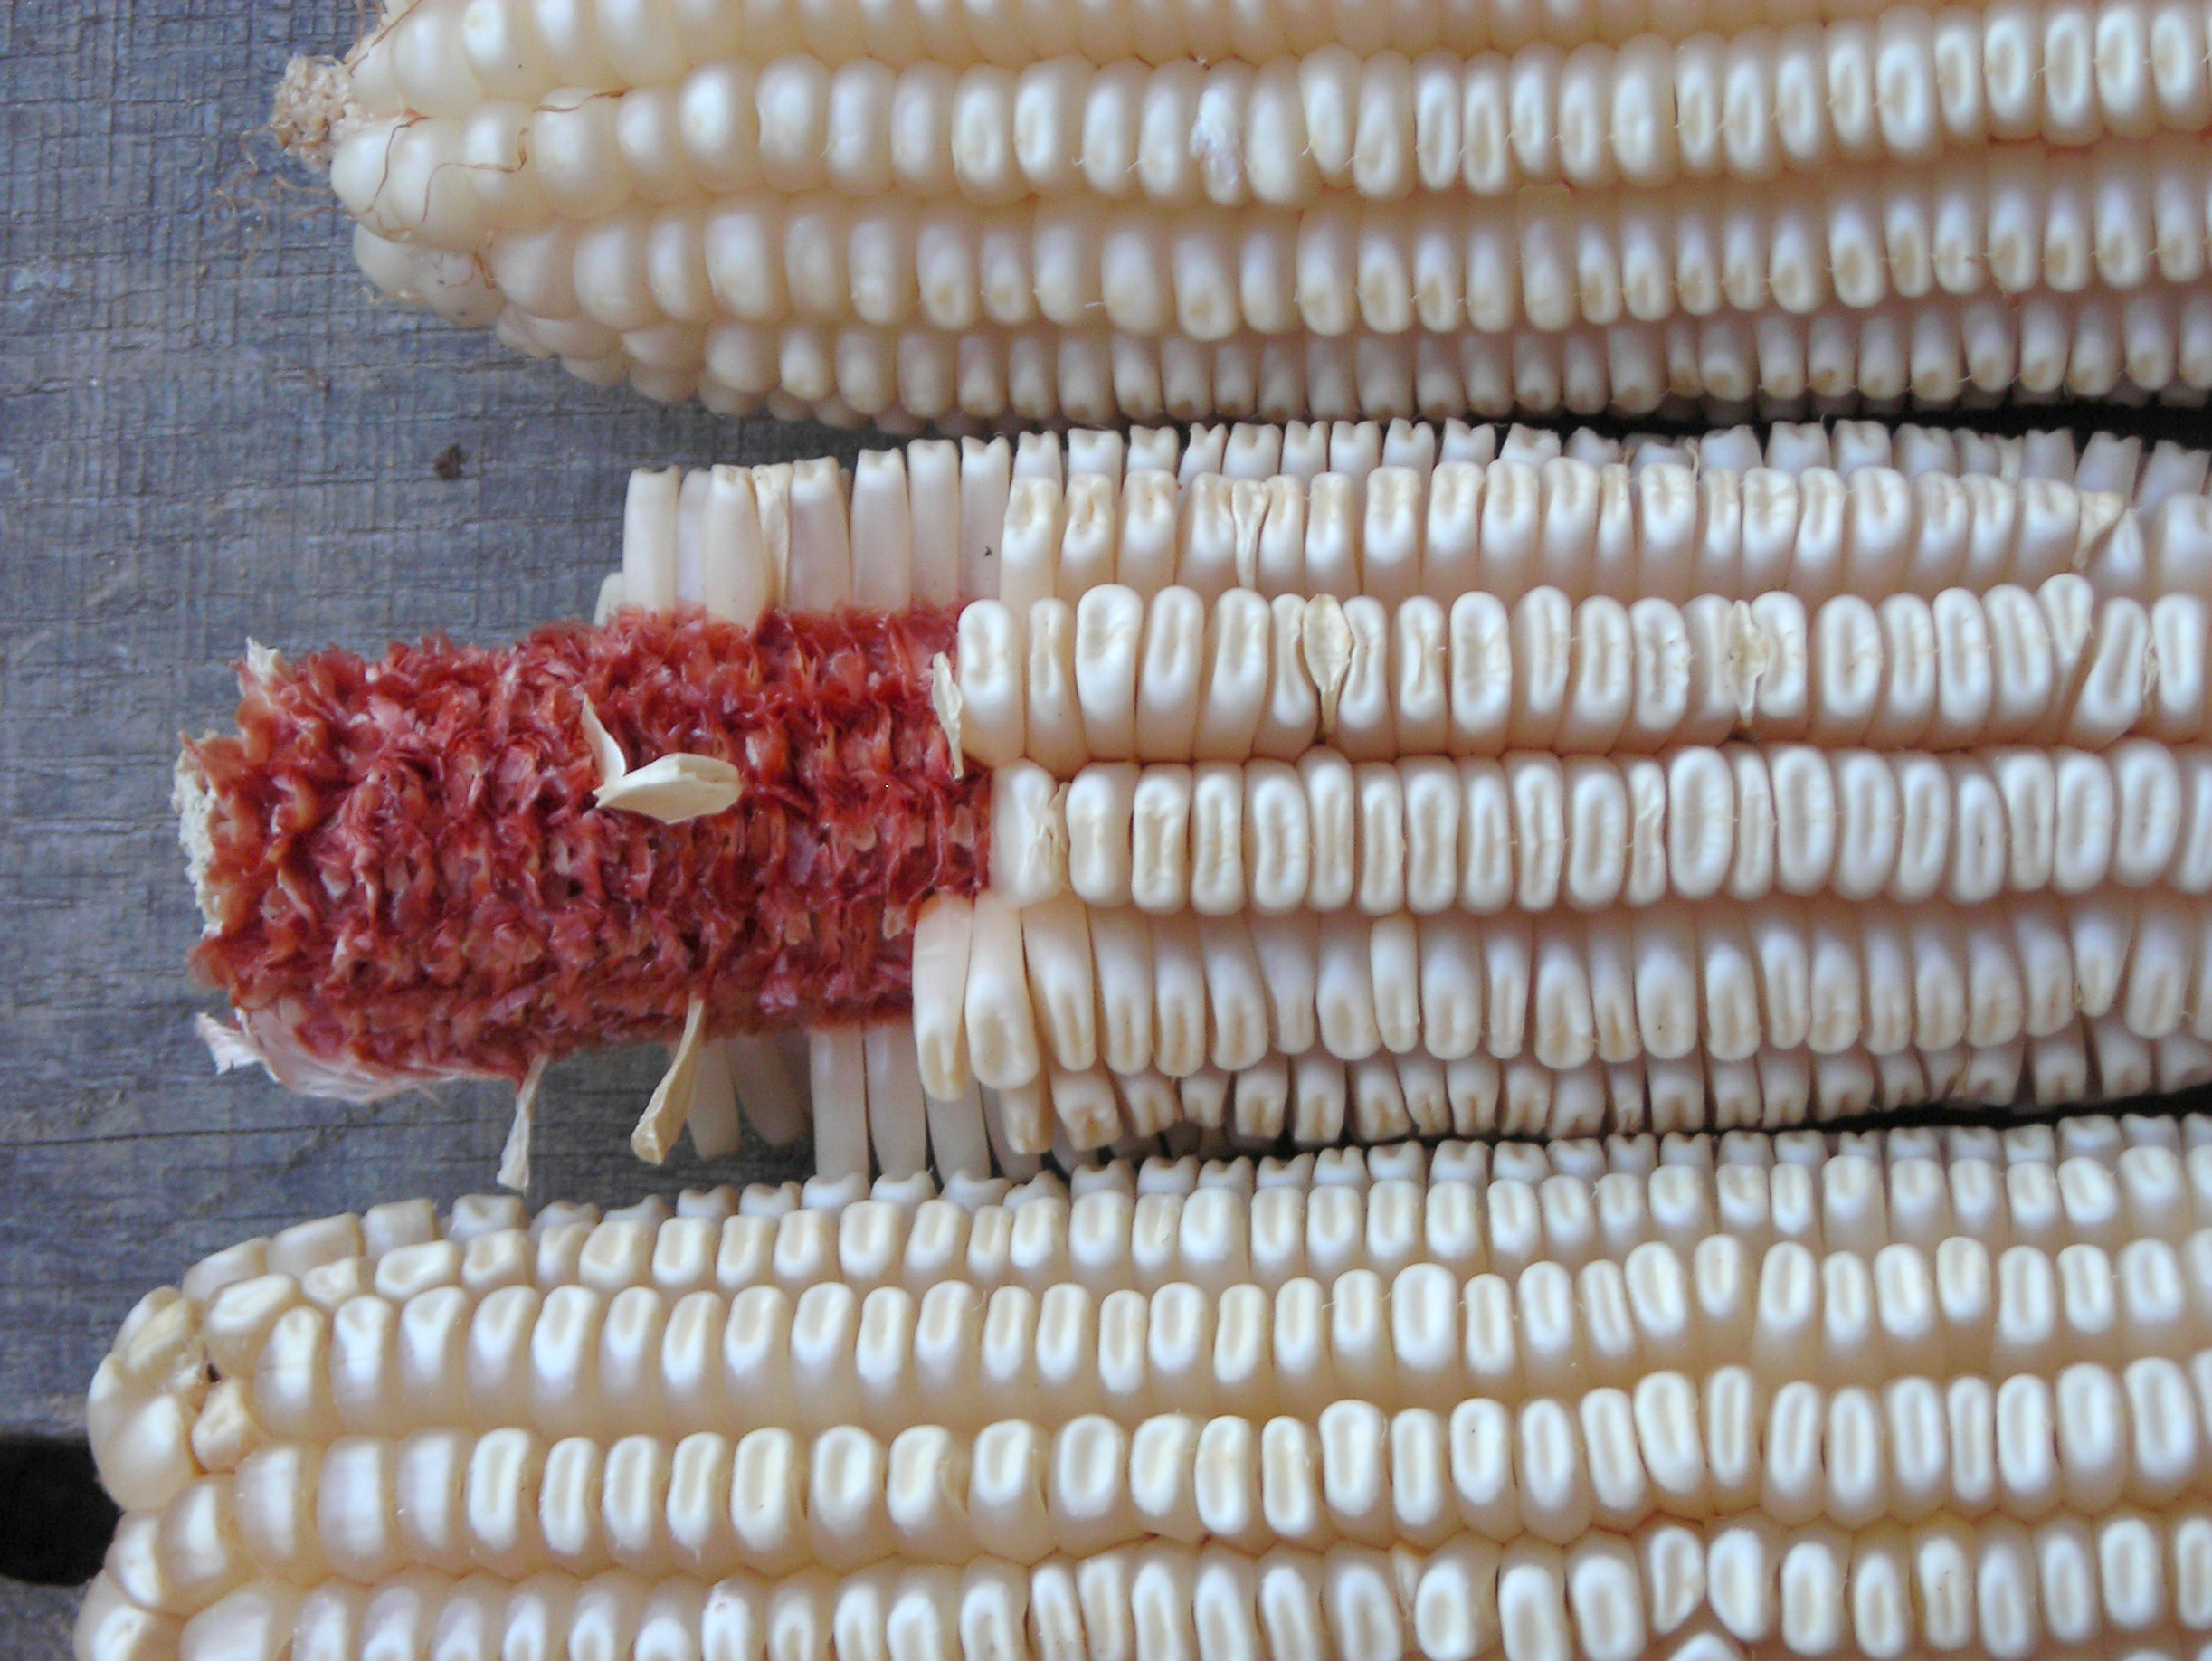 Tennessee Red Cob Dent Corn